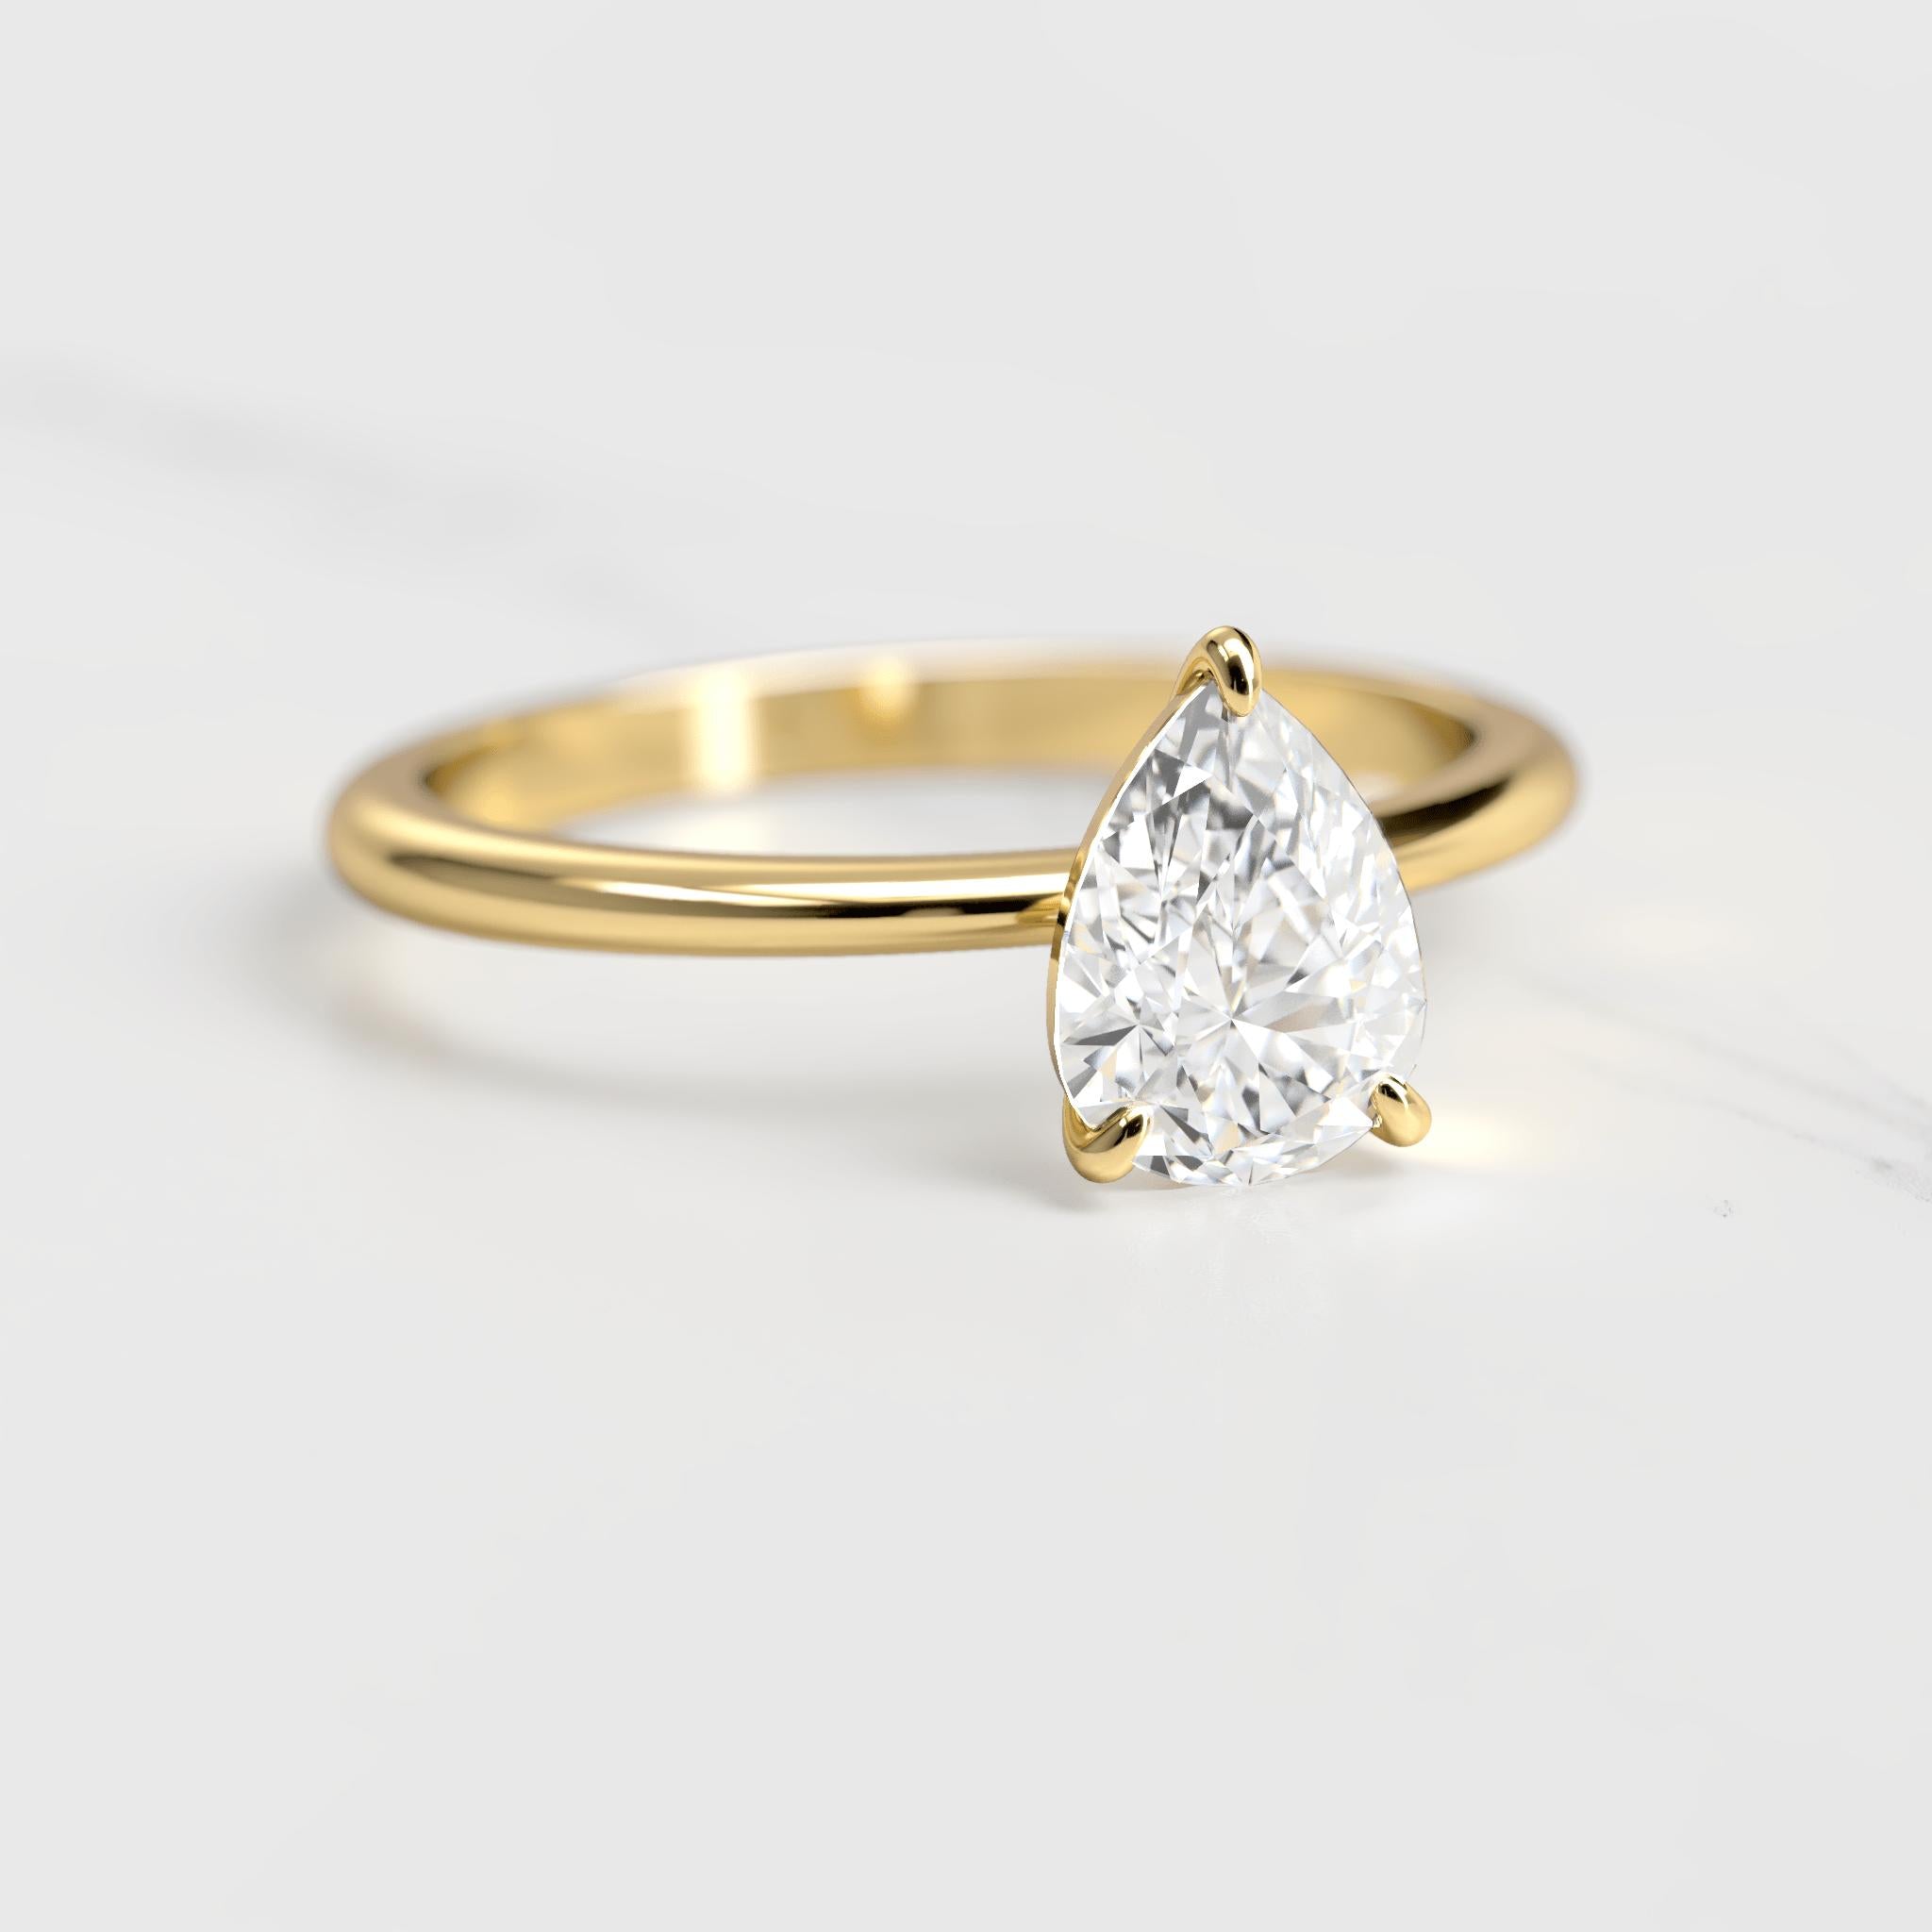 Pear Tapered Solitaire Diamond Ring - 18k yellow gold / 0.5ct / lab diamond